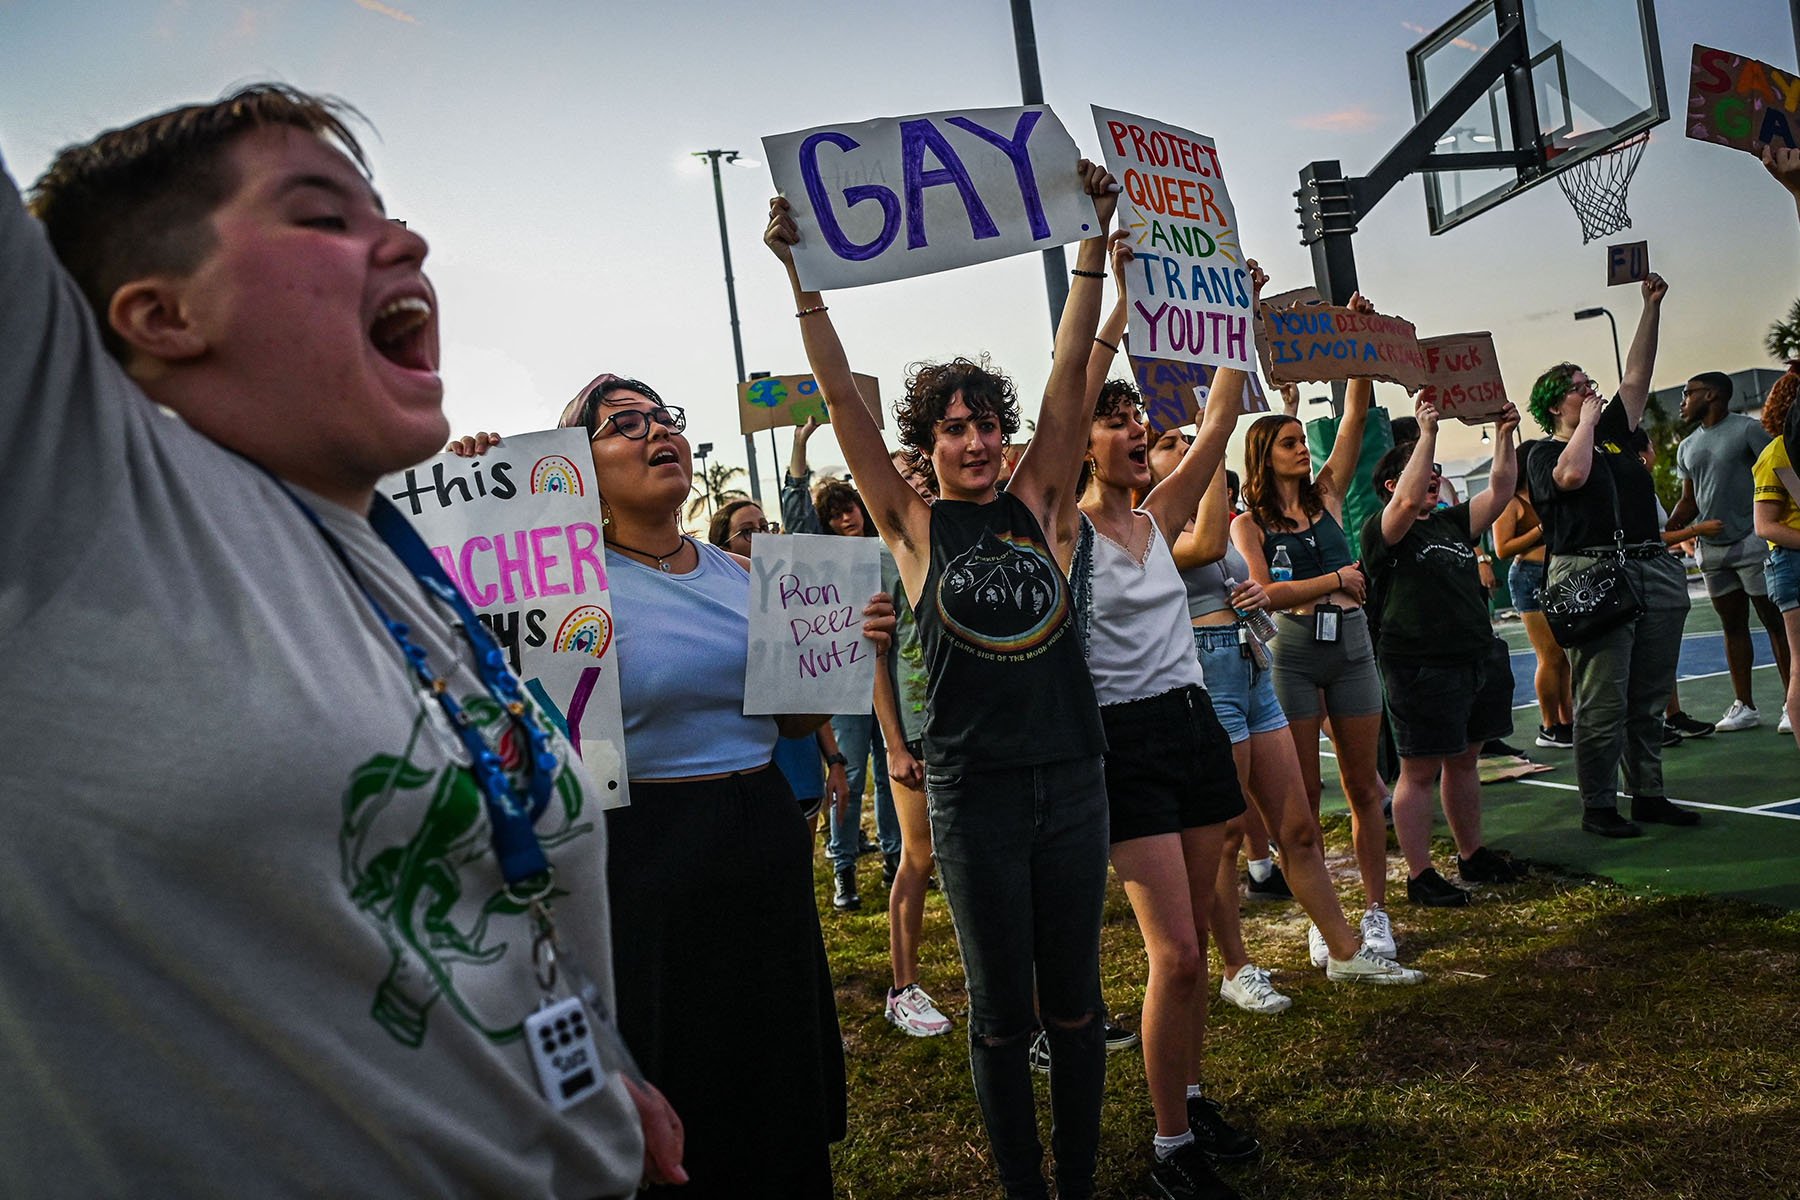 Young LGBTQ+ rights supporters hold signs and protest against Florida Governor Ron DeSantis outside a Trump campaign event.